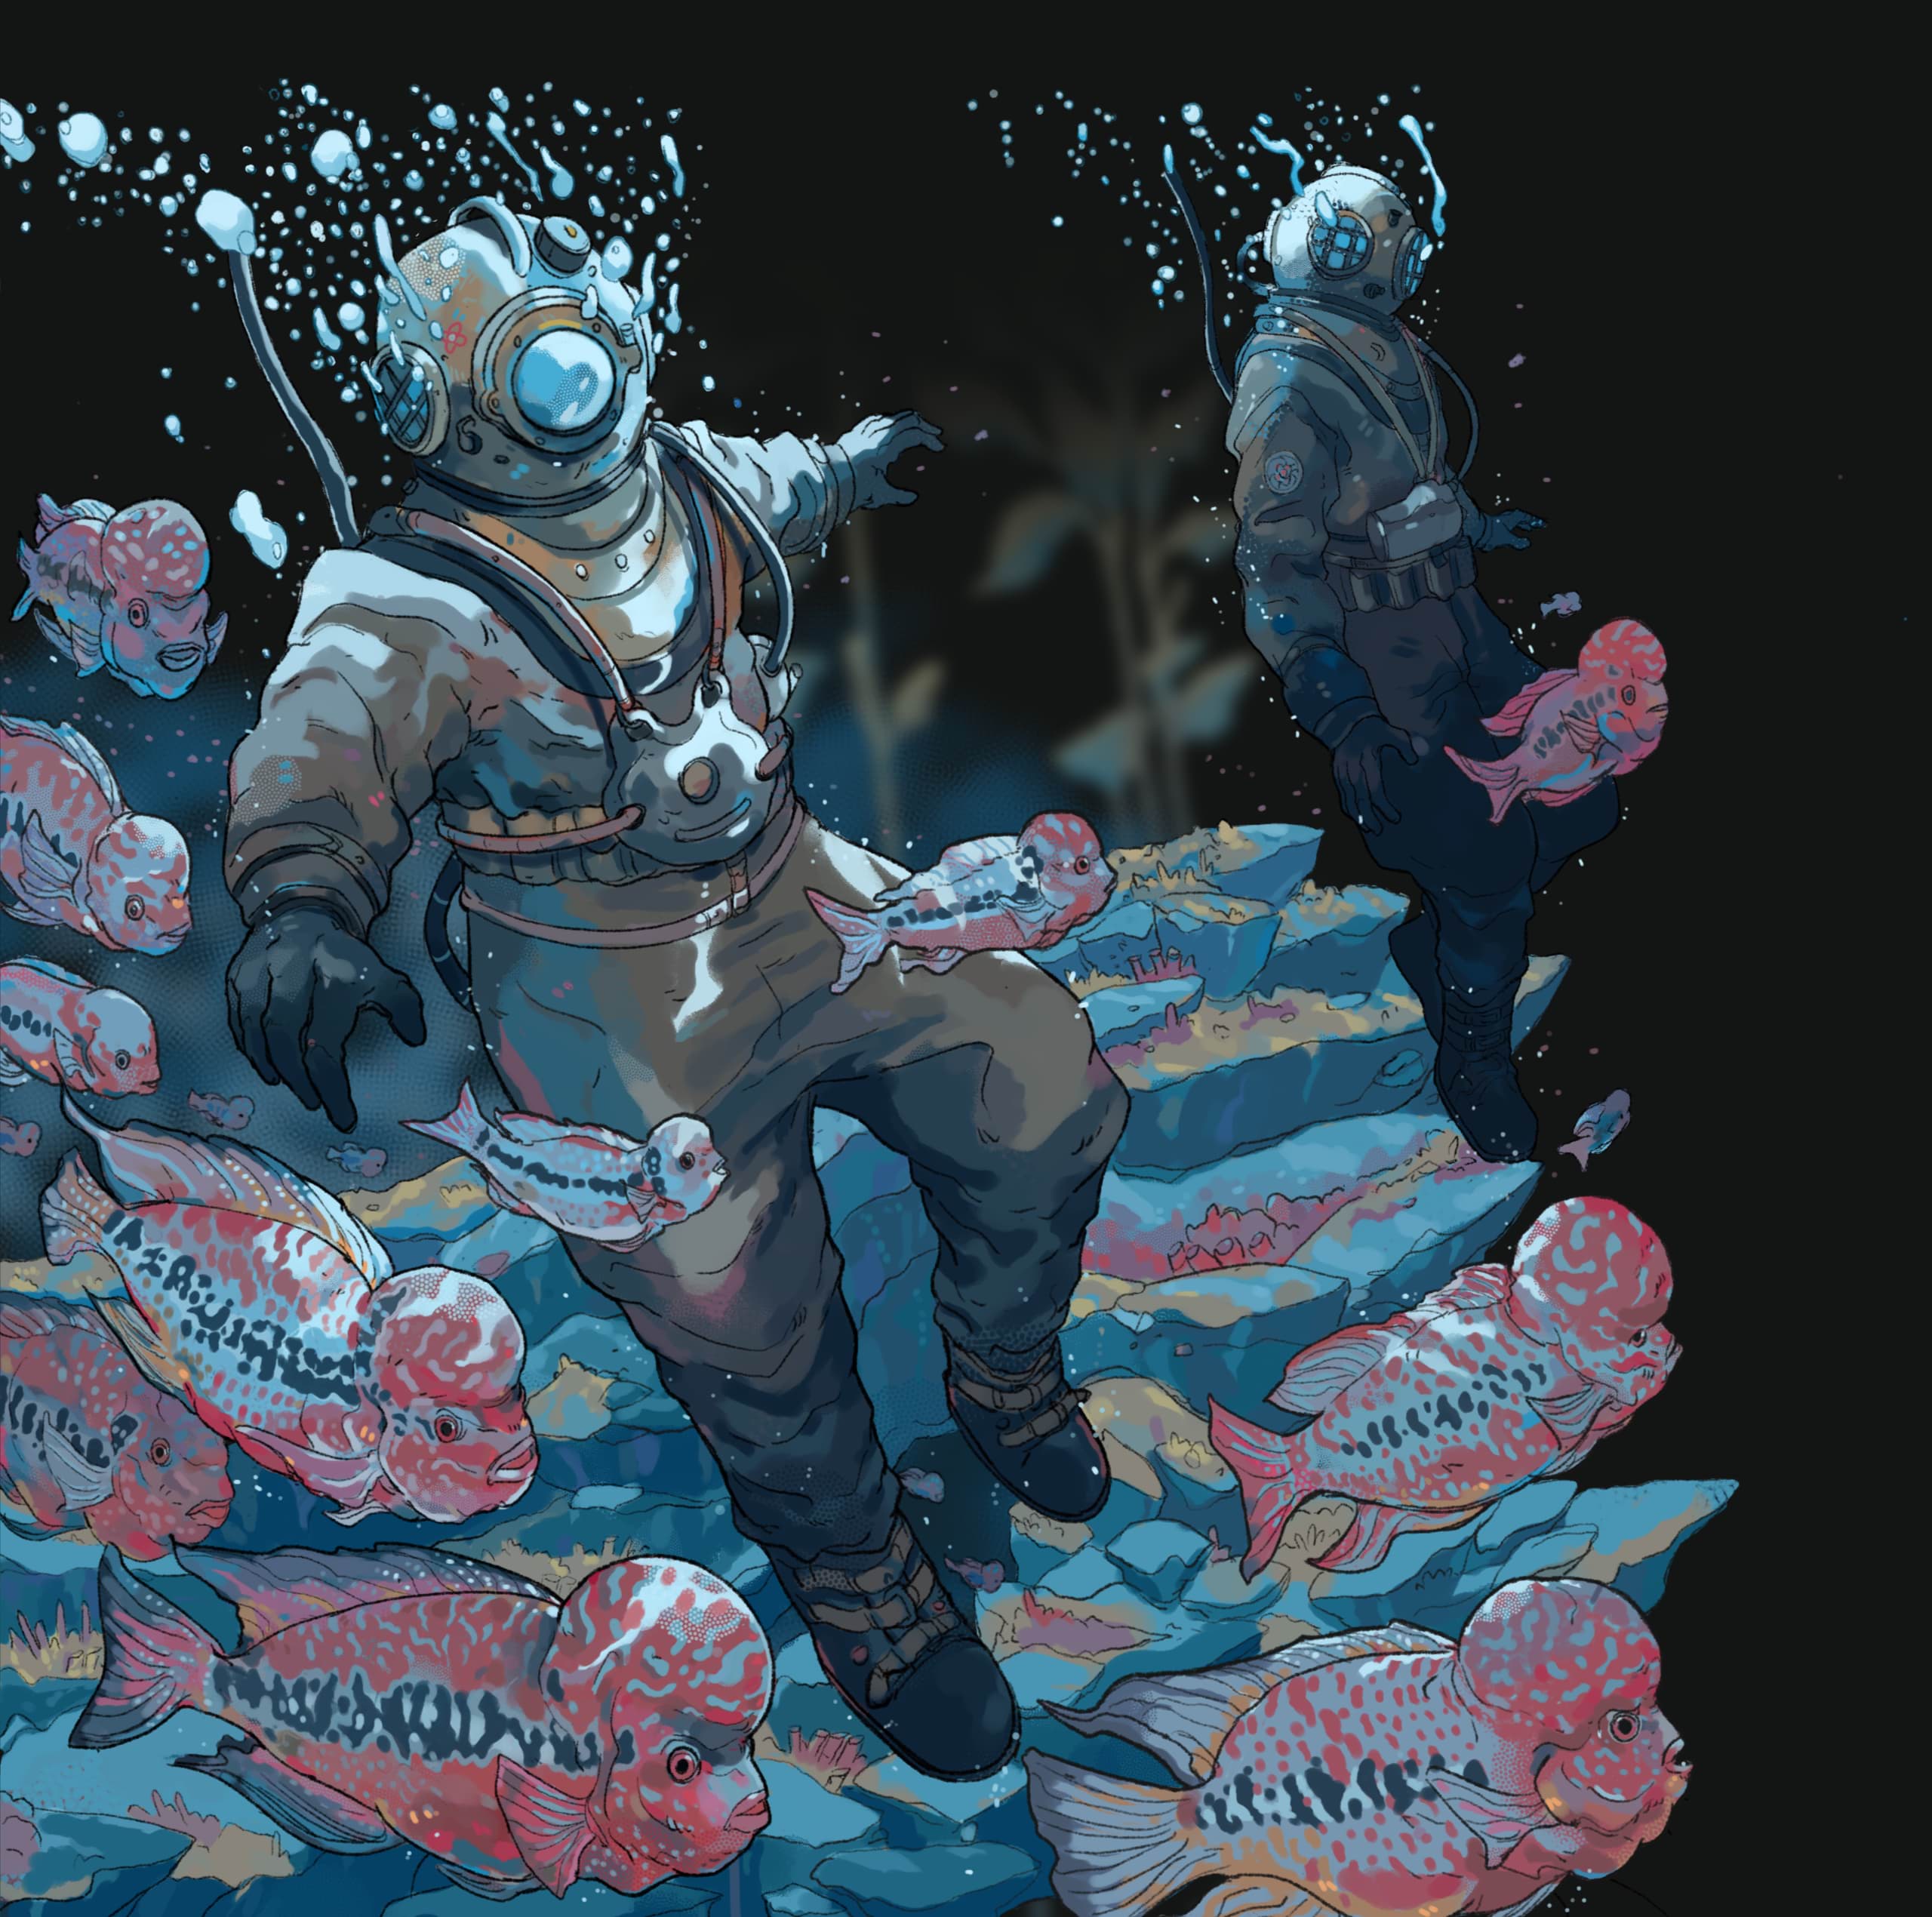 Digital painting of Victorian-style scuba divers underwater, surrounded by pink fish and kelp, created in Affinity Photo